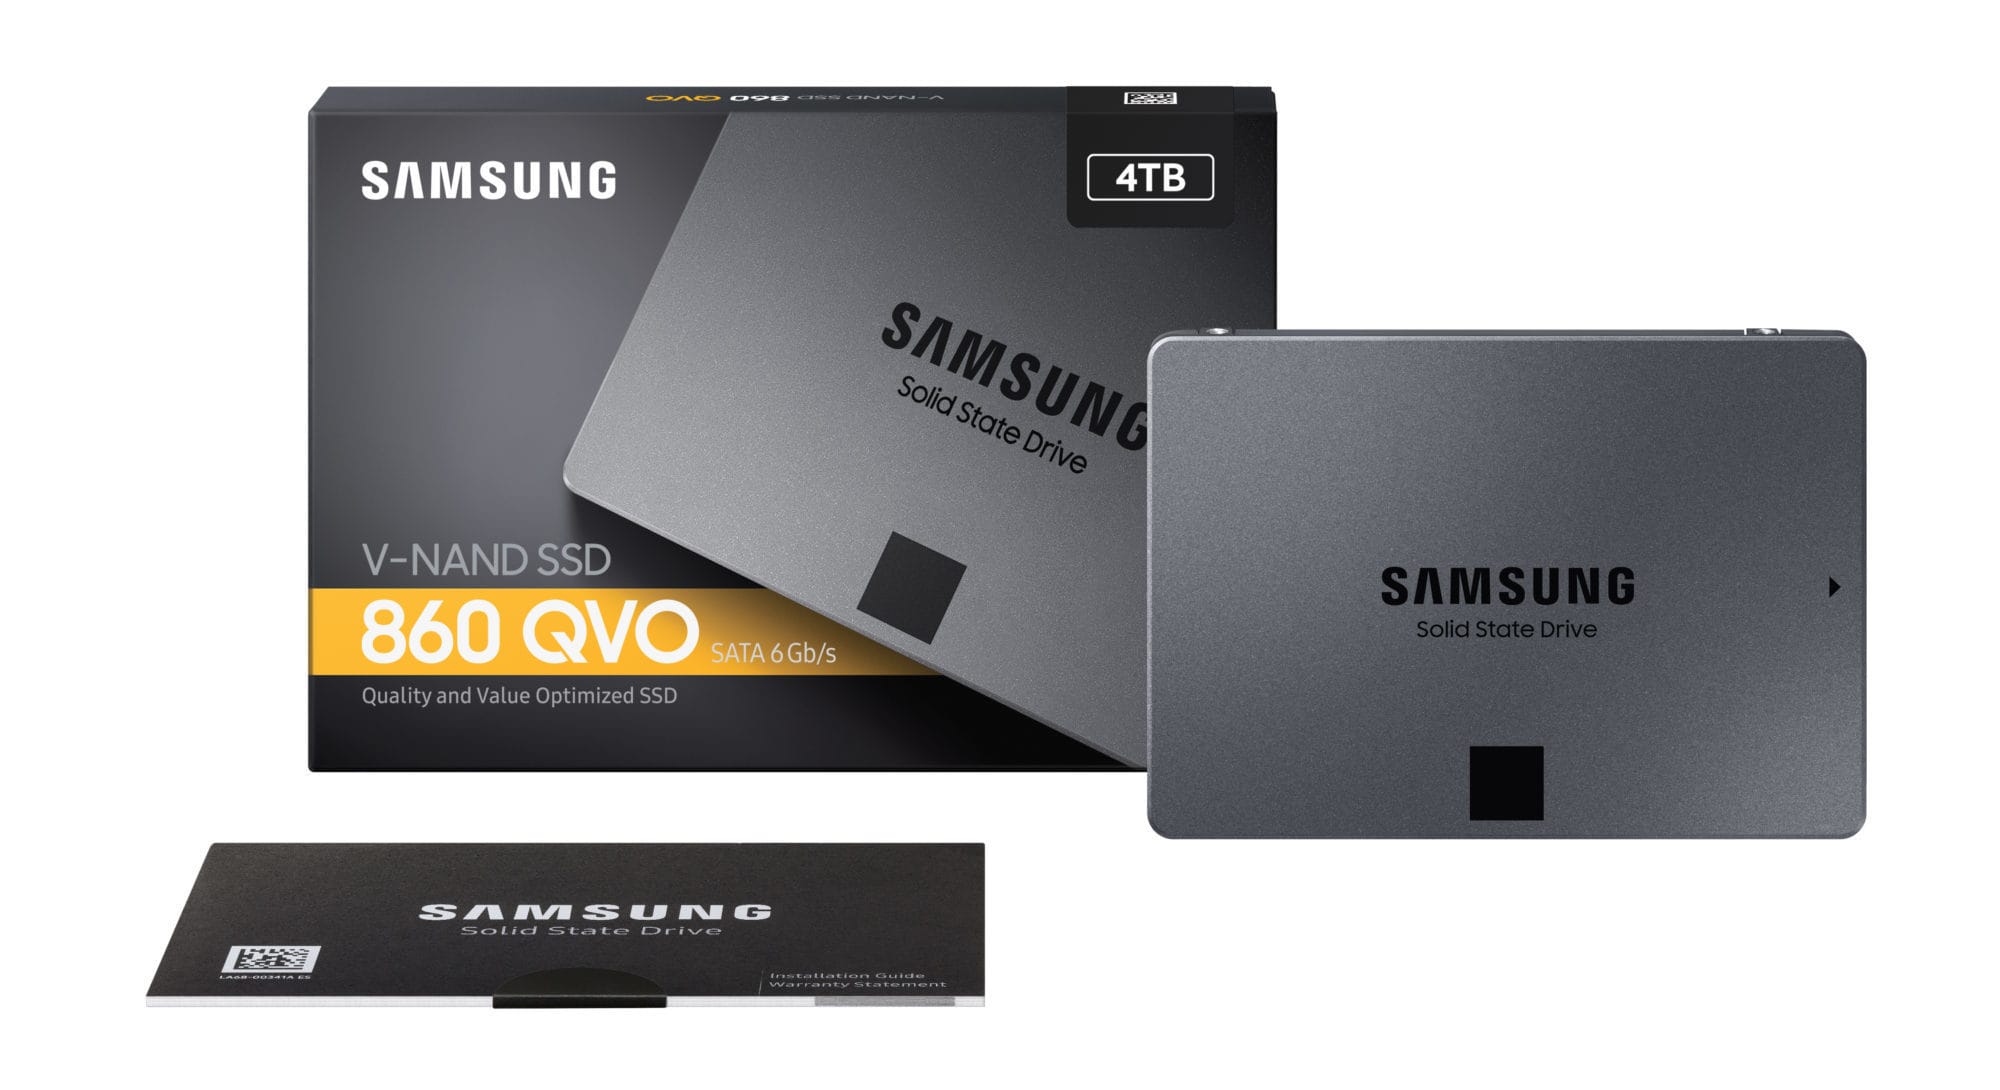 Samsung launches 860 QVO SSDs with up to 4TB capacity using QLC NAND